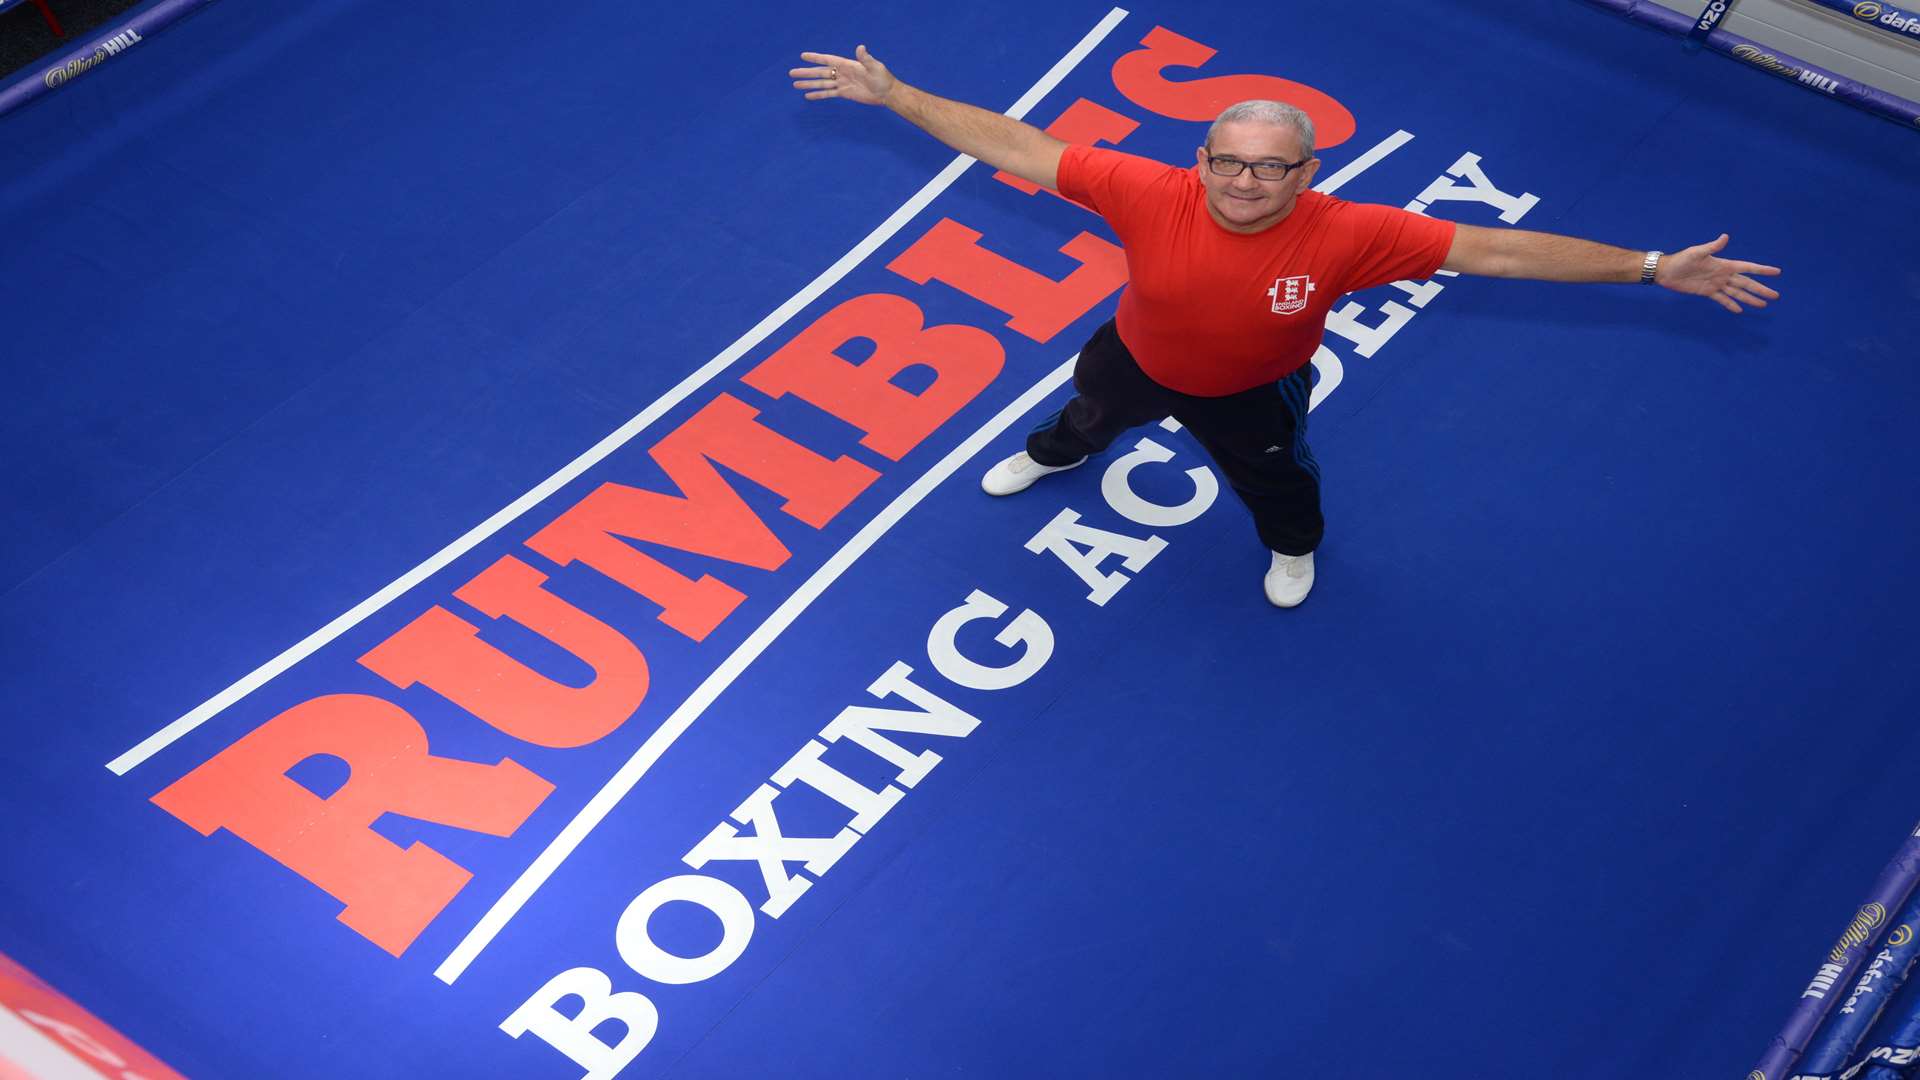 Boxing coach Charlie Rumble in the ring at his academy